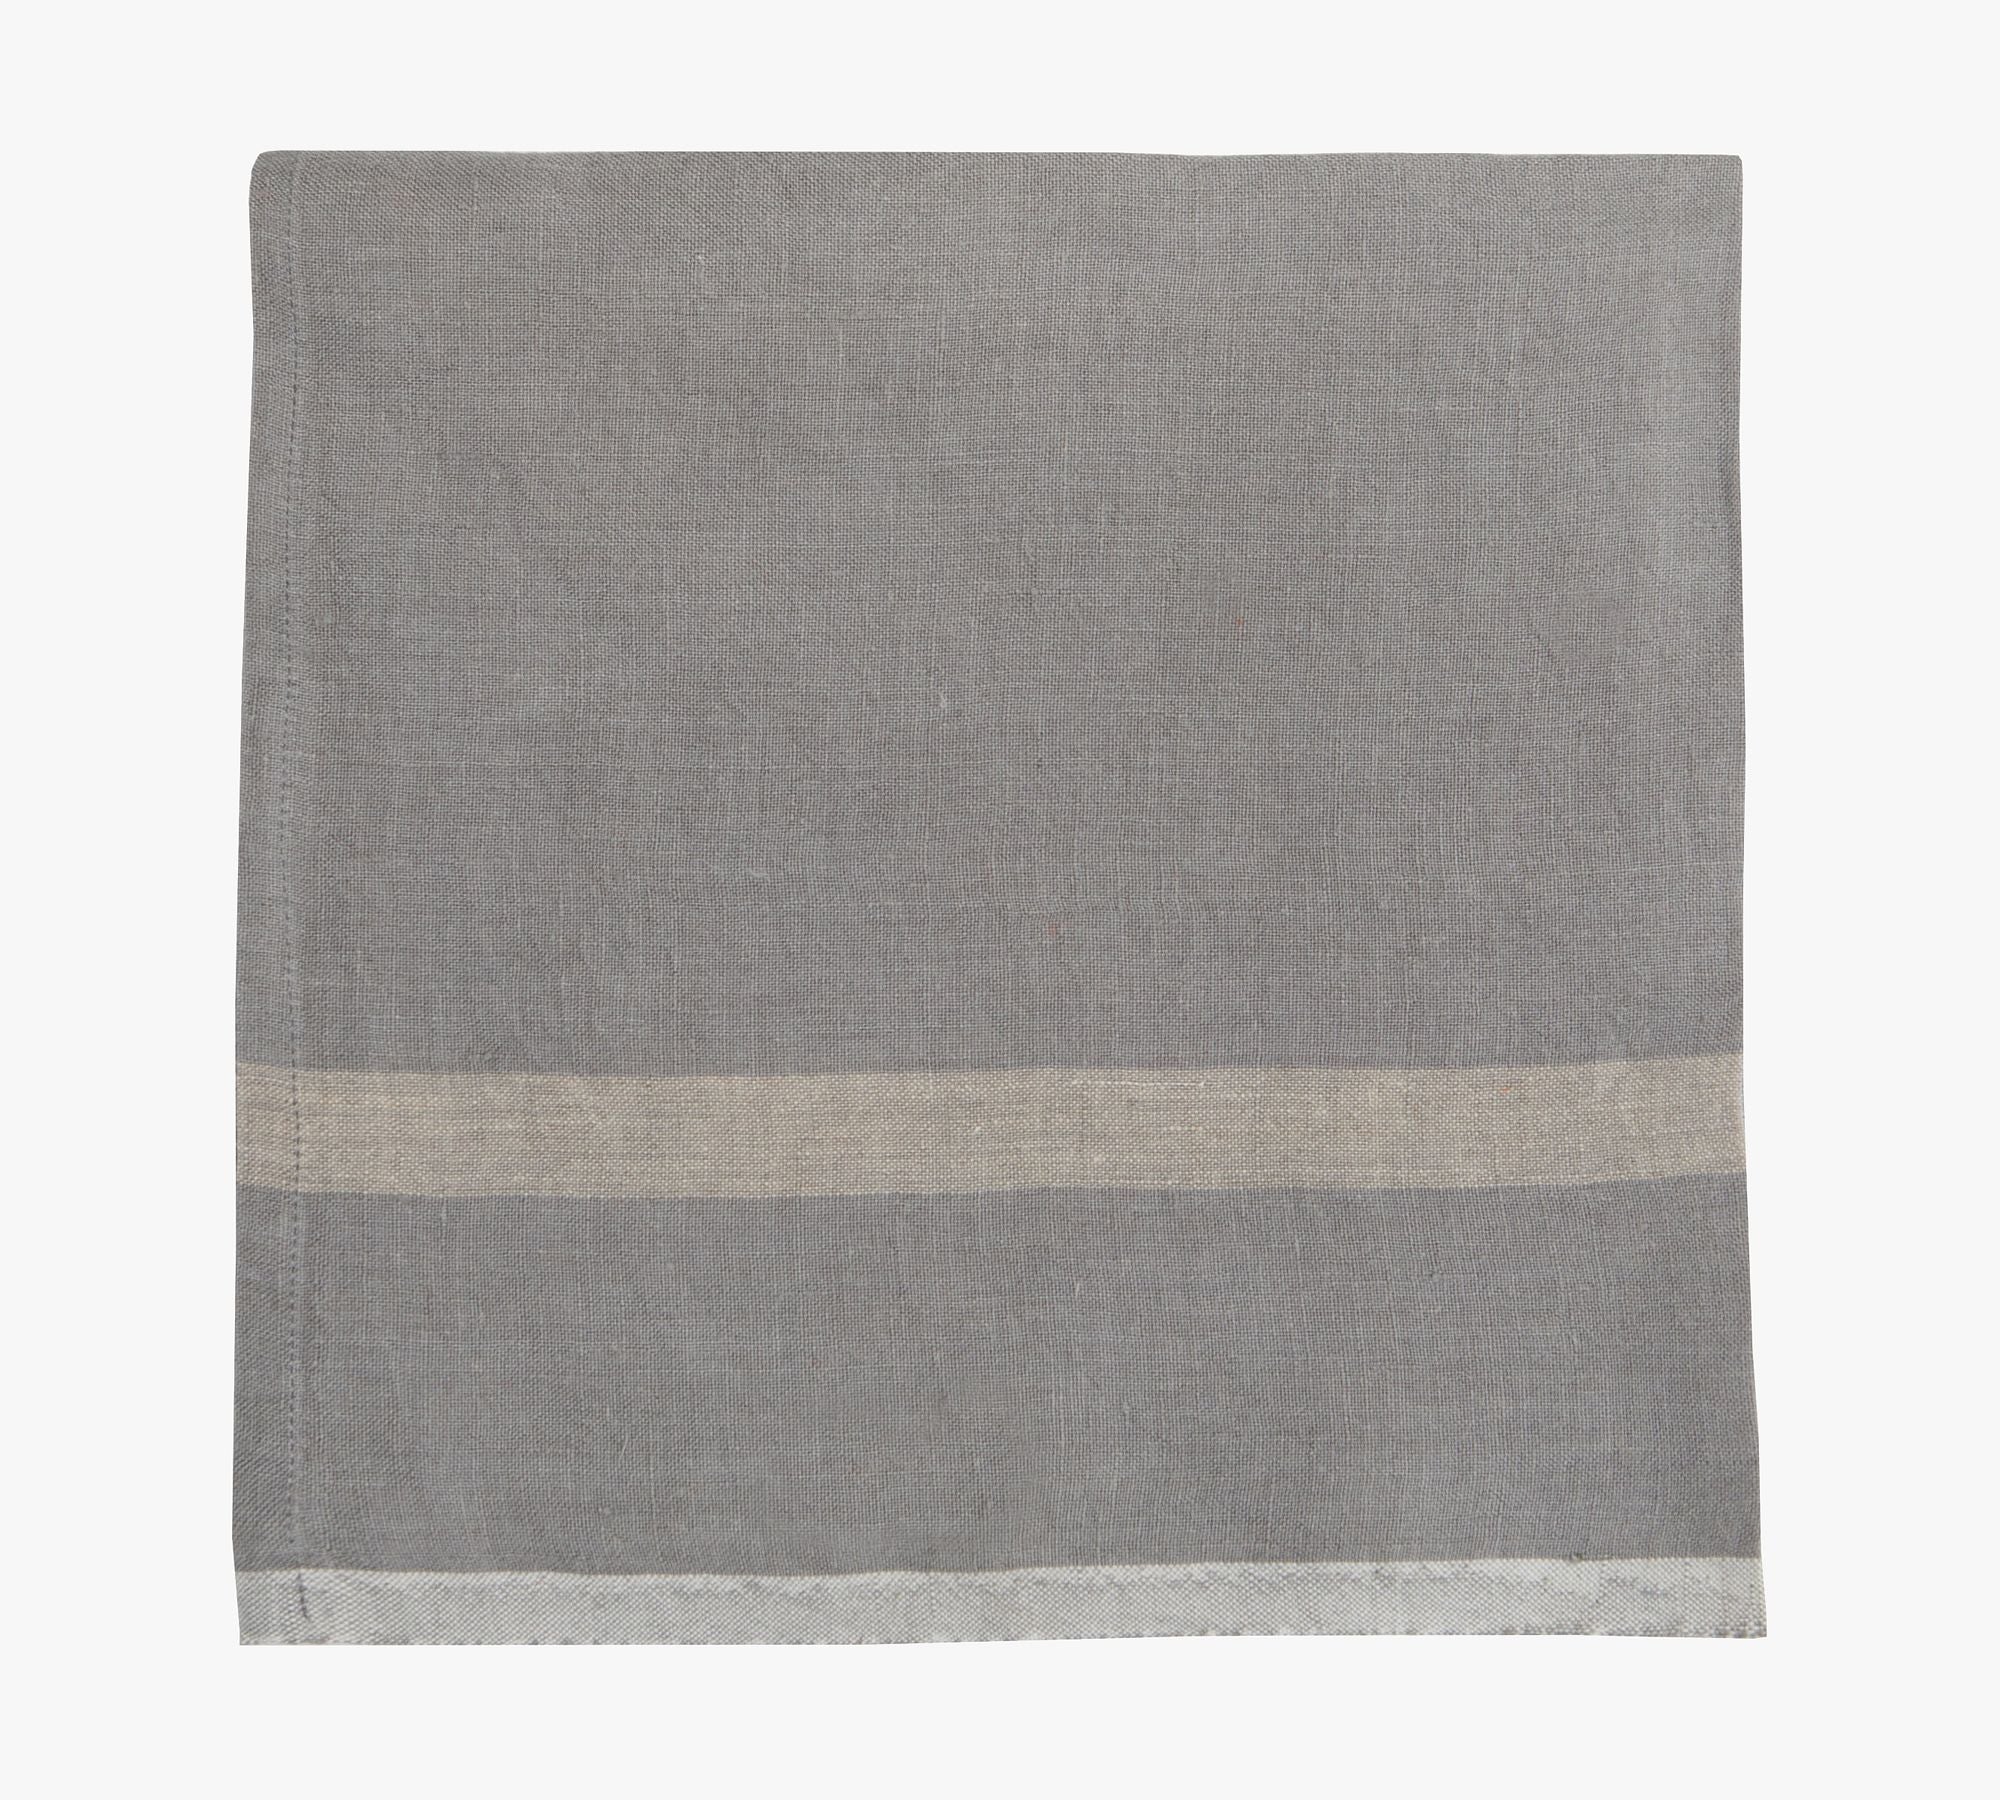 LAUNDERED LINEN NAPKIN IN GREY WITH NATURAL SRIPE